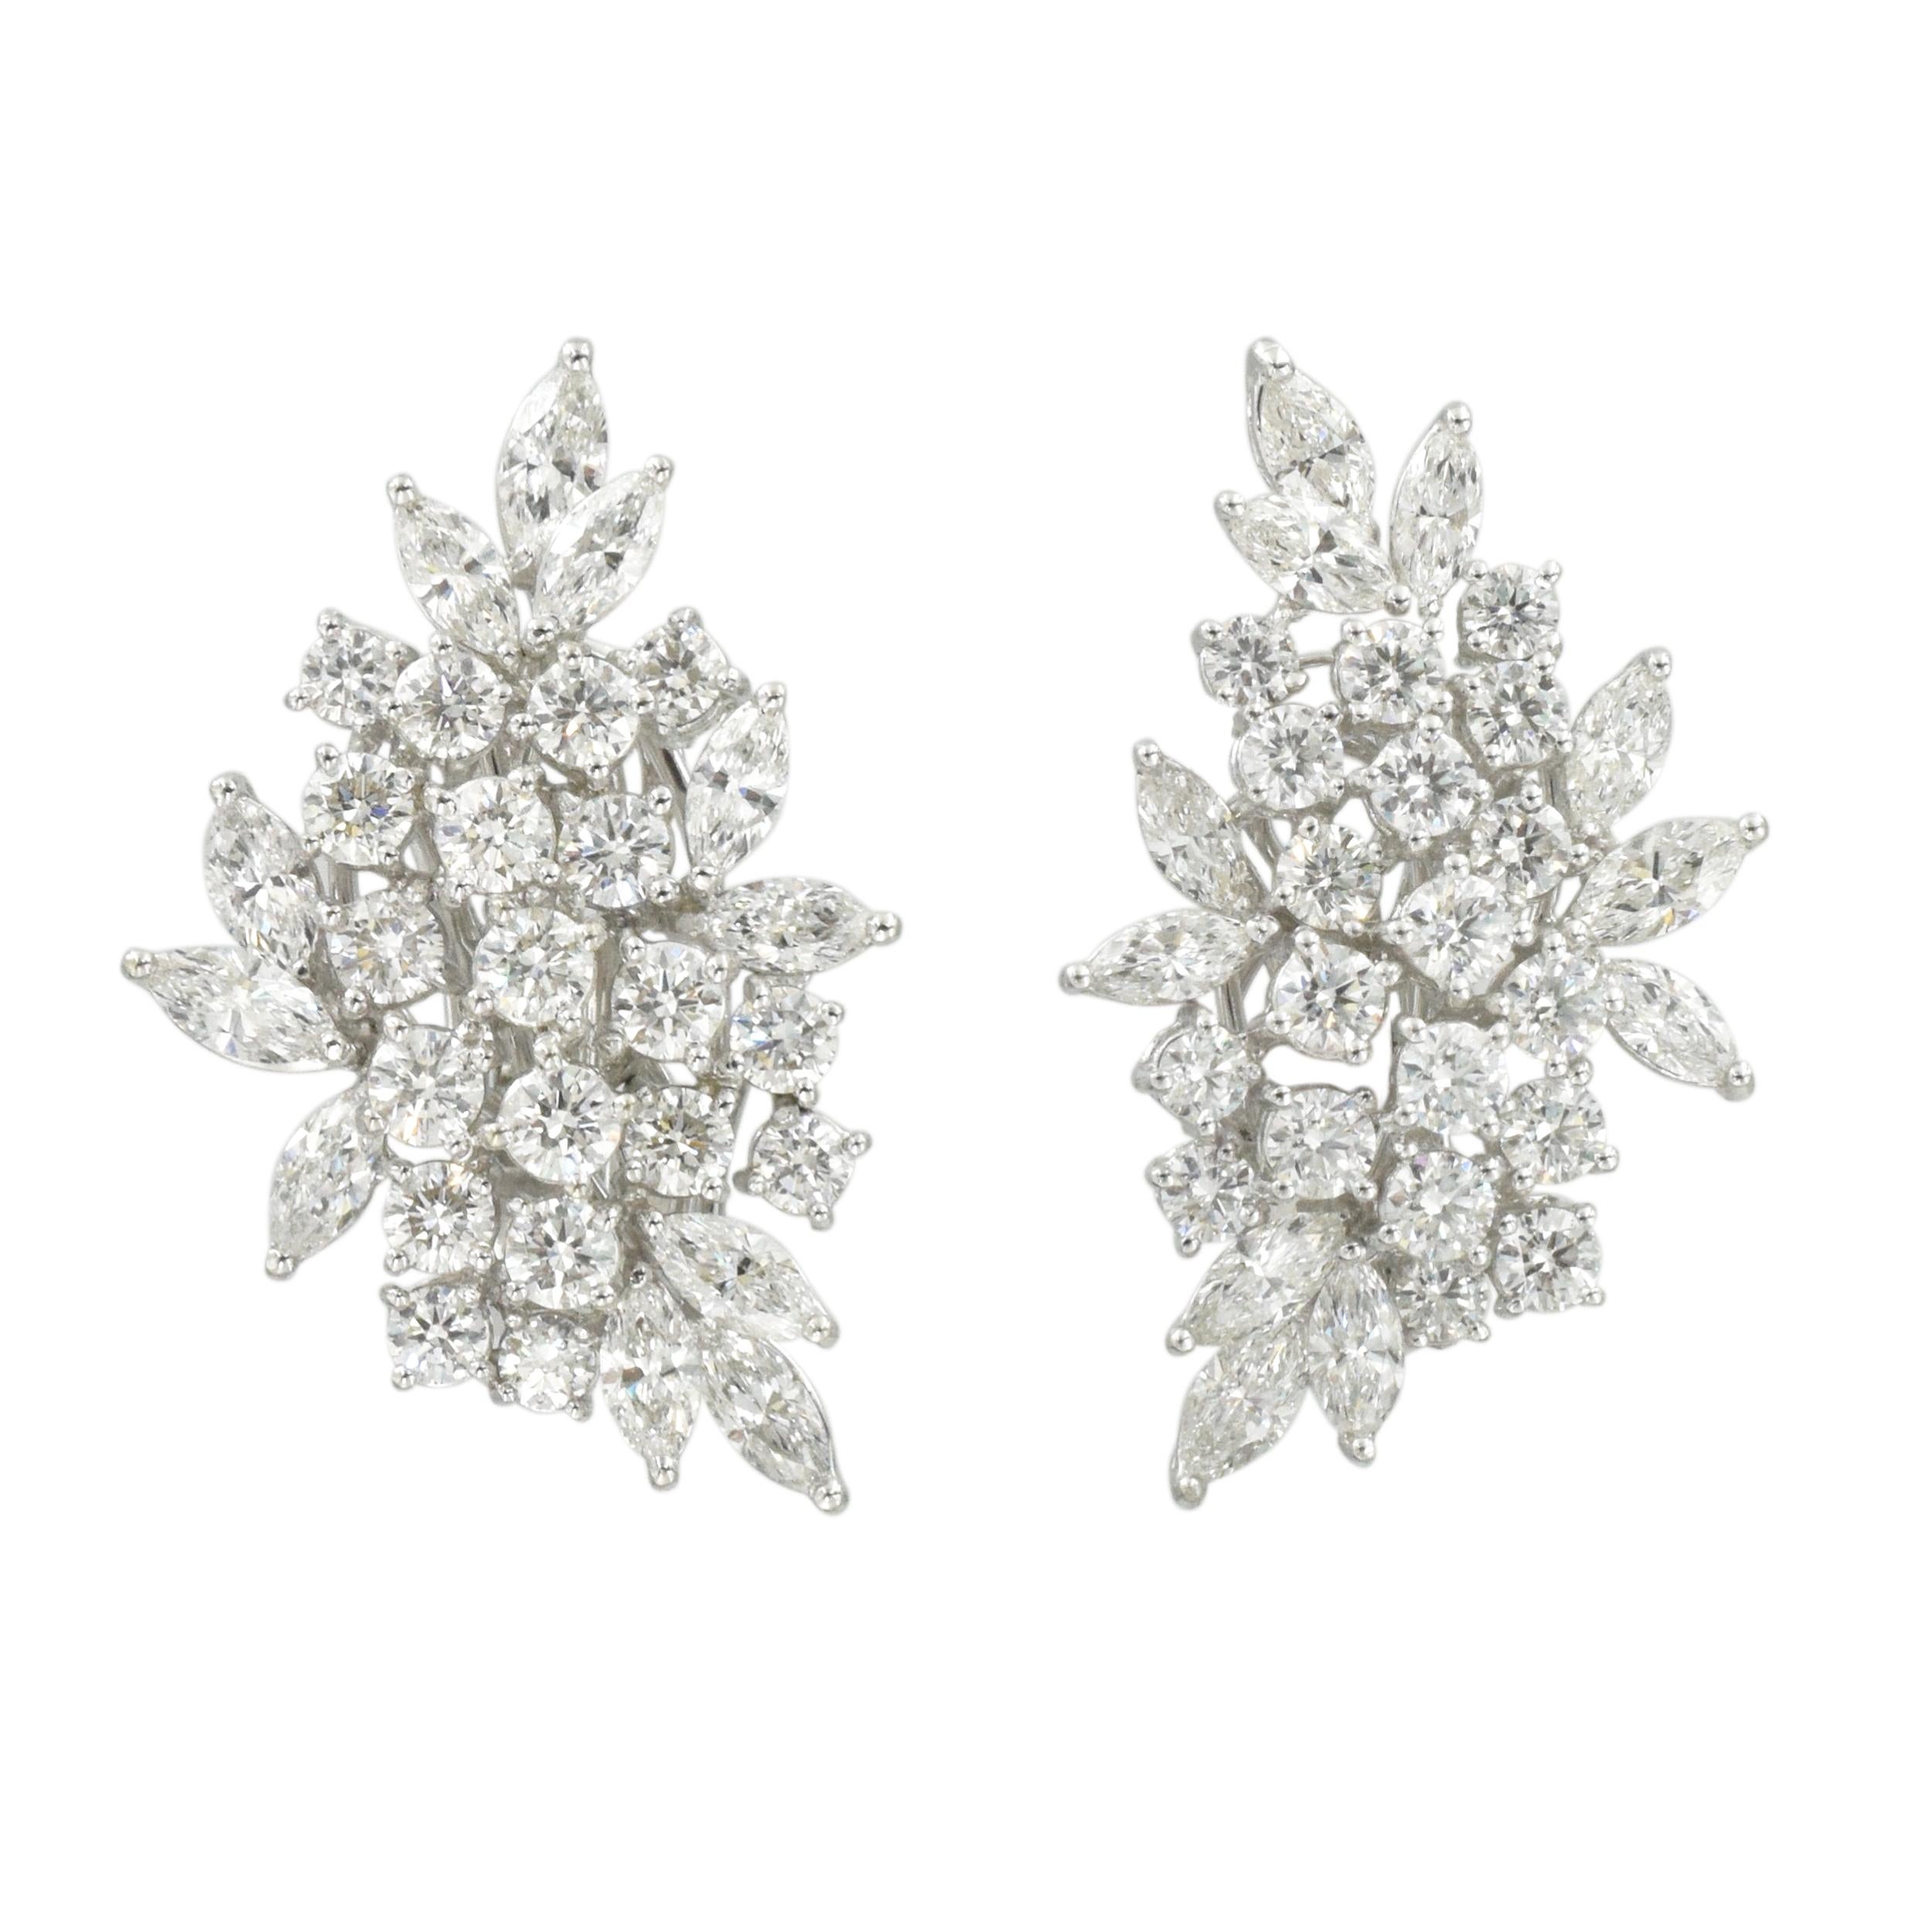 Diamond cluster ear-clips These earrings consist of 38 round brilliant cut and 22 marquise cut  with total weight of 7 carats of near colorless fine diamonds.
.The earrings are crafted in 18k white gold. 
Equipped with the hook for the drops and